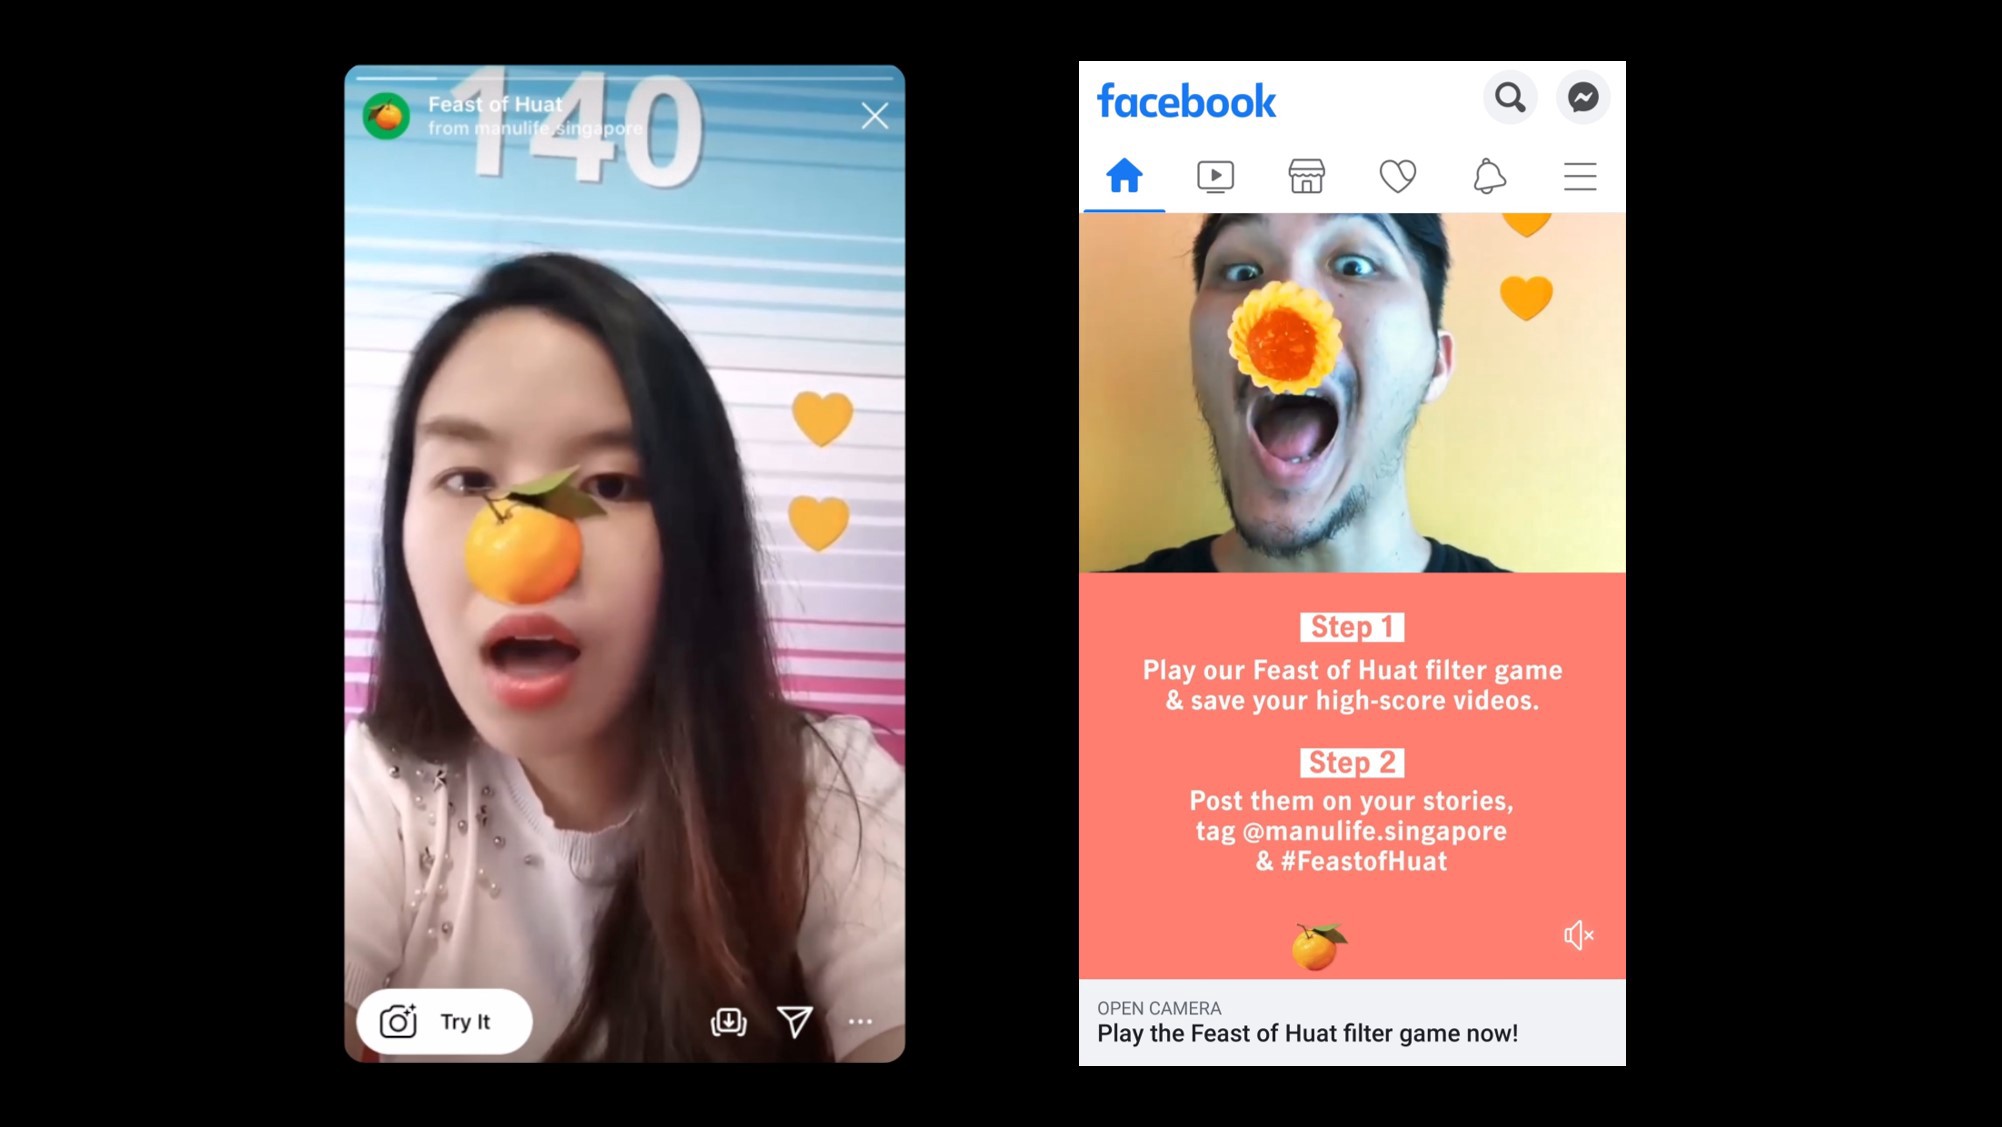 Marvy Co. | What Facebook campaigns can you create with AR technology?